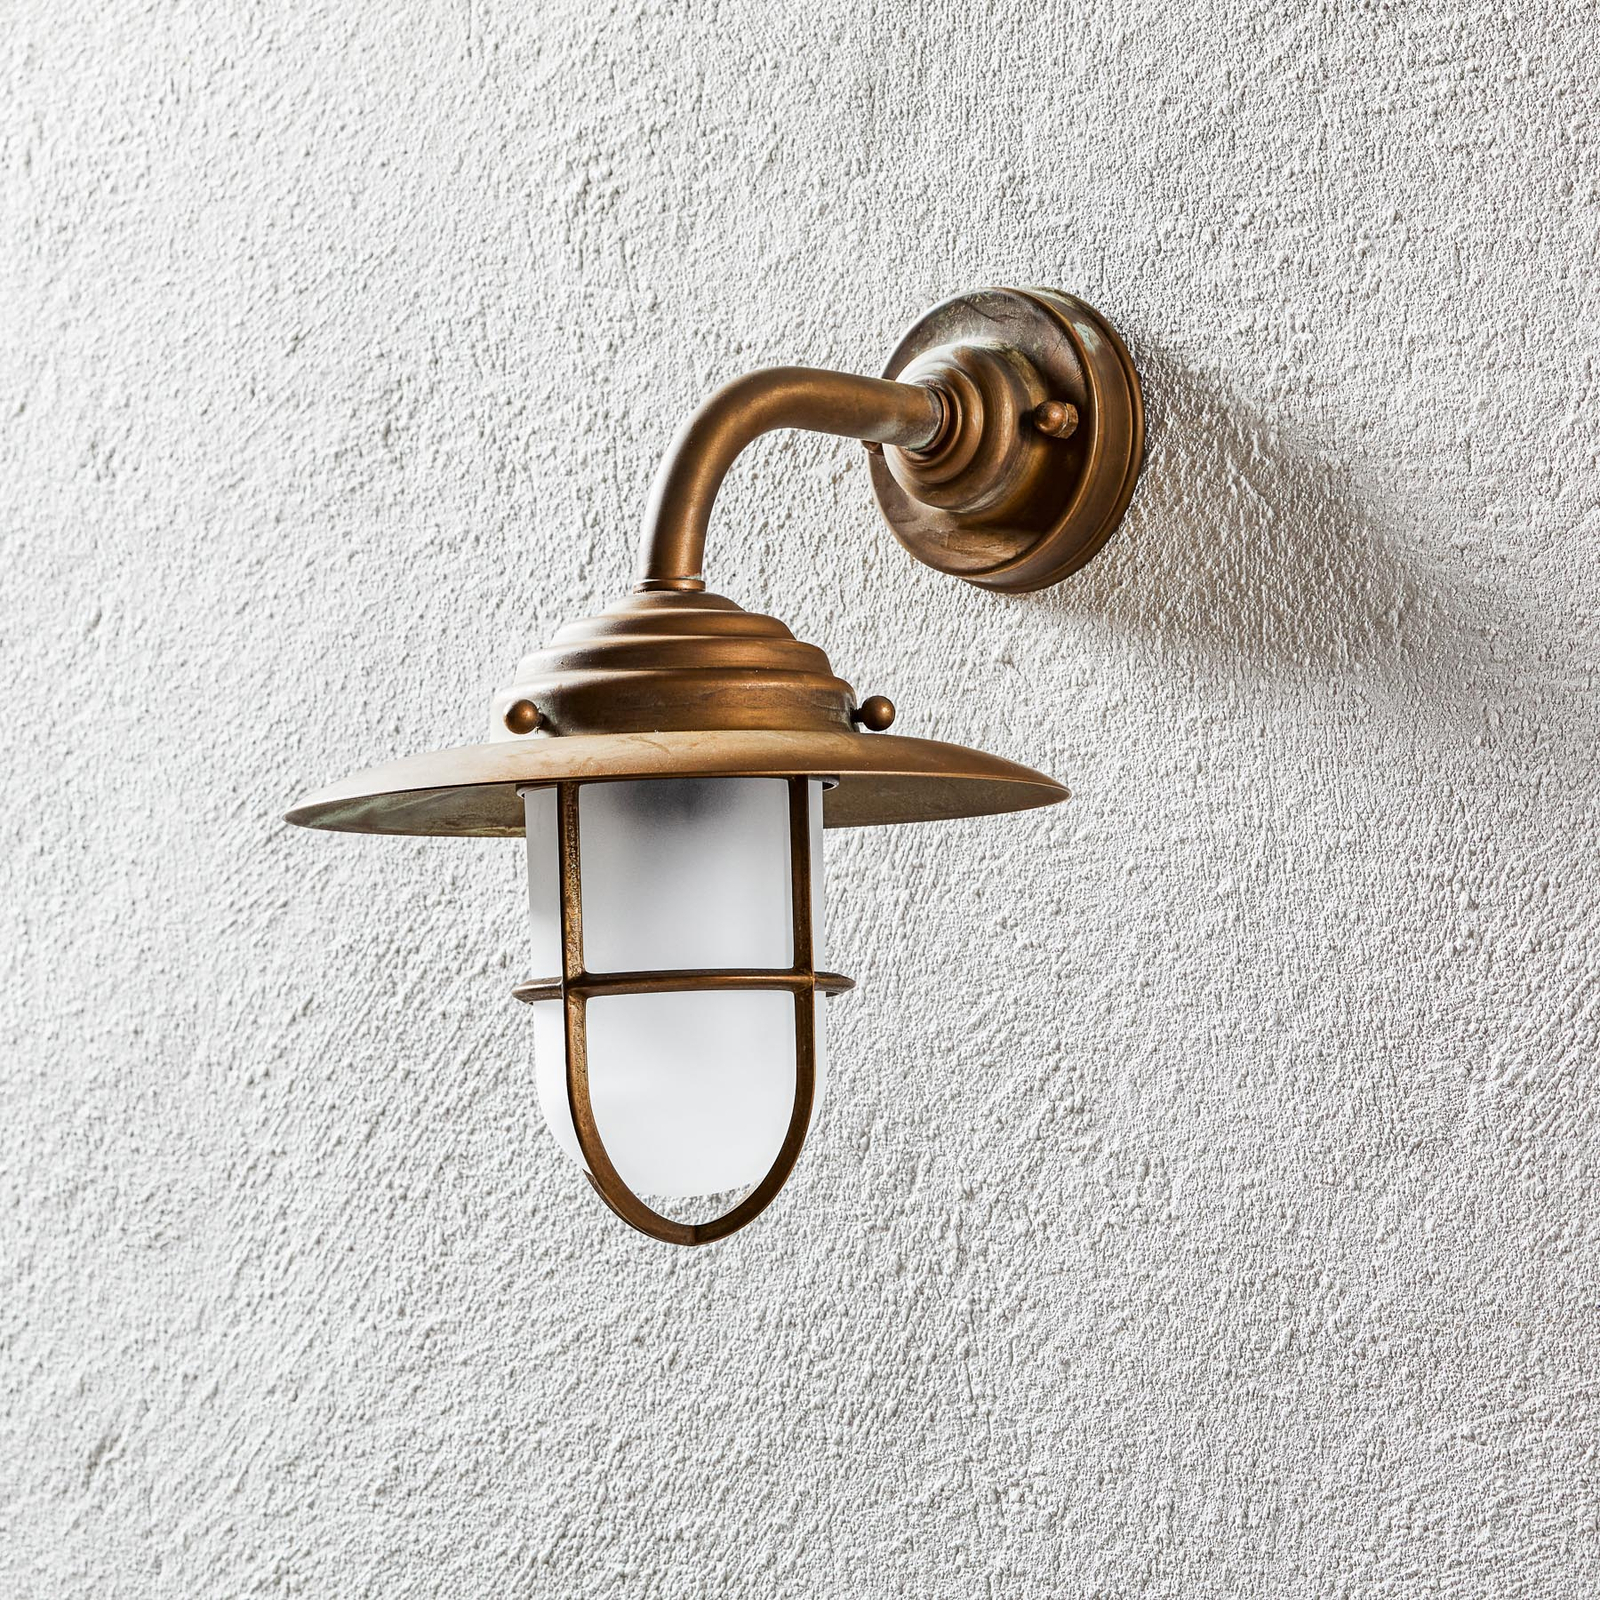 Antique outdoor wall light with grille, frosted glass